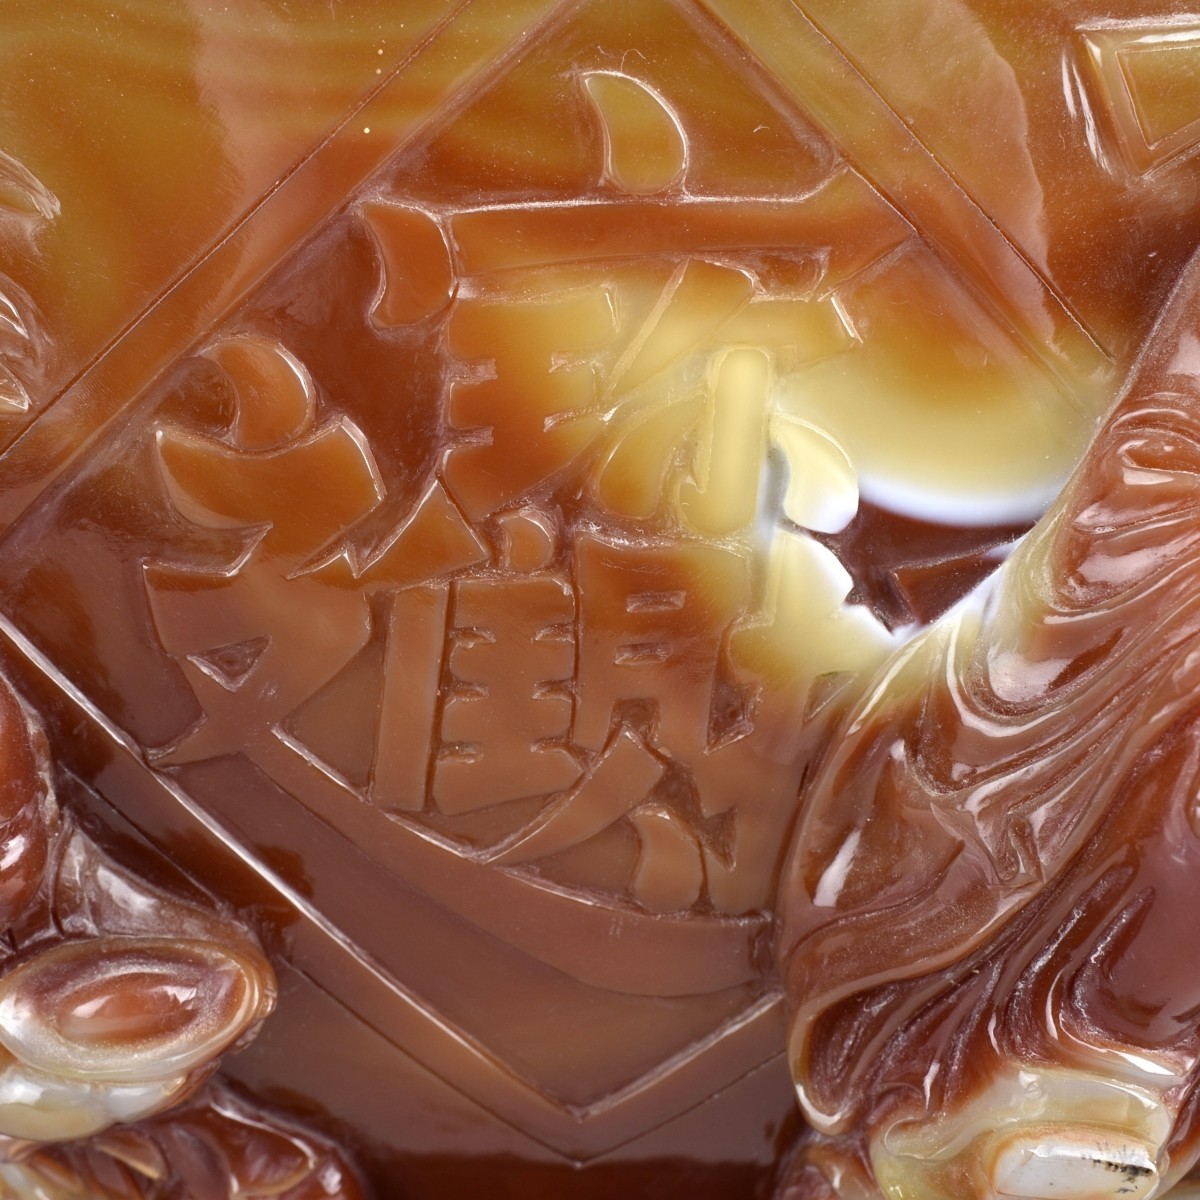 Chinese Carnelian Covered Bowl